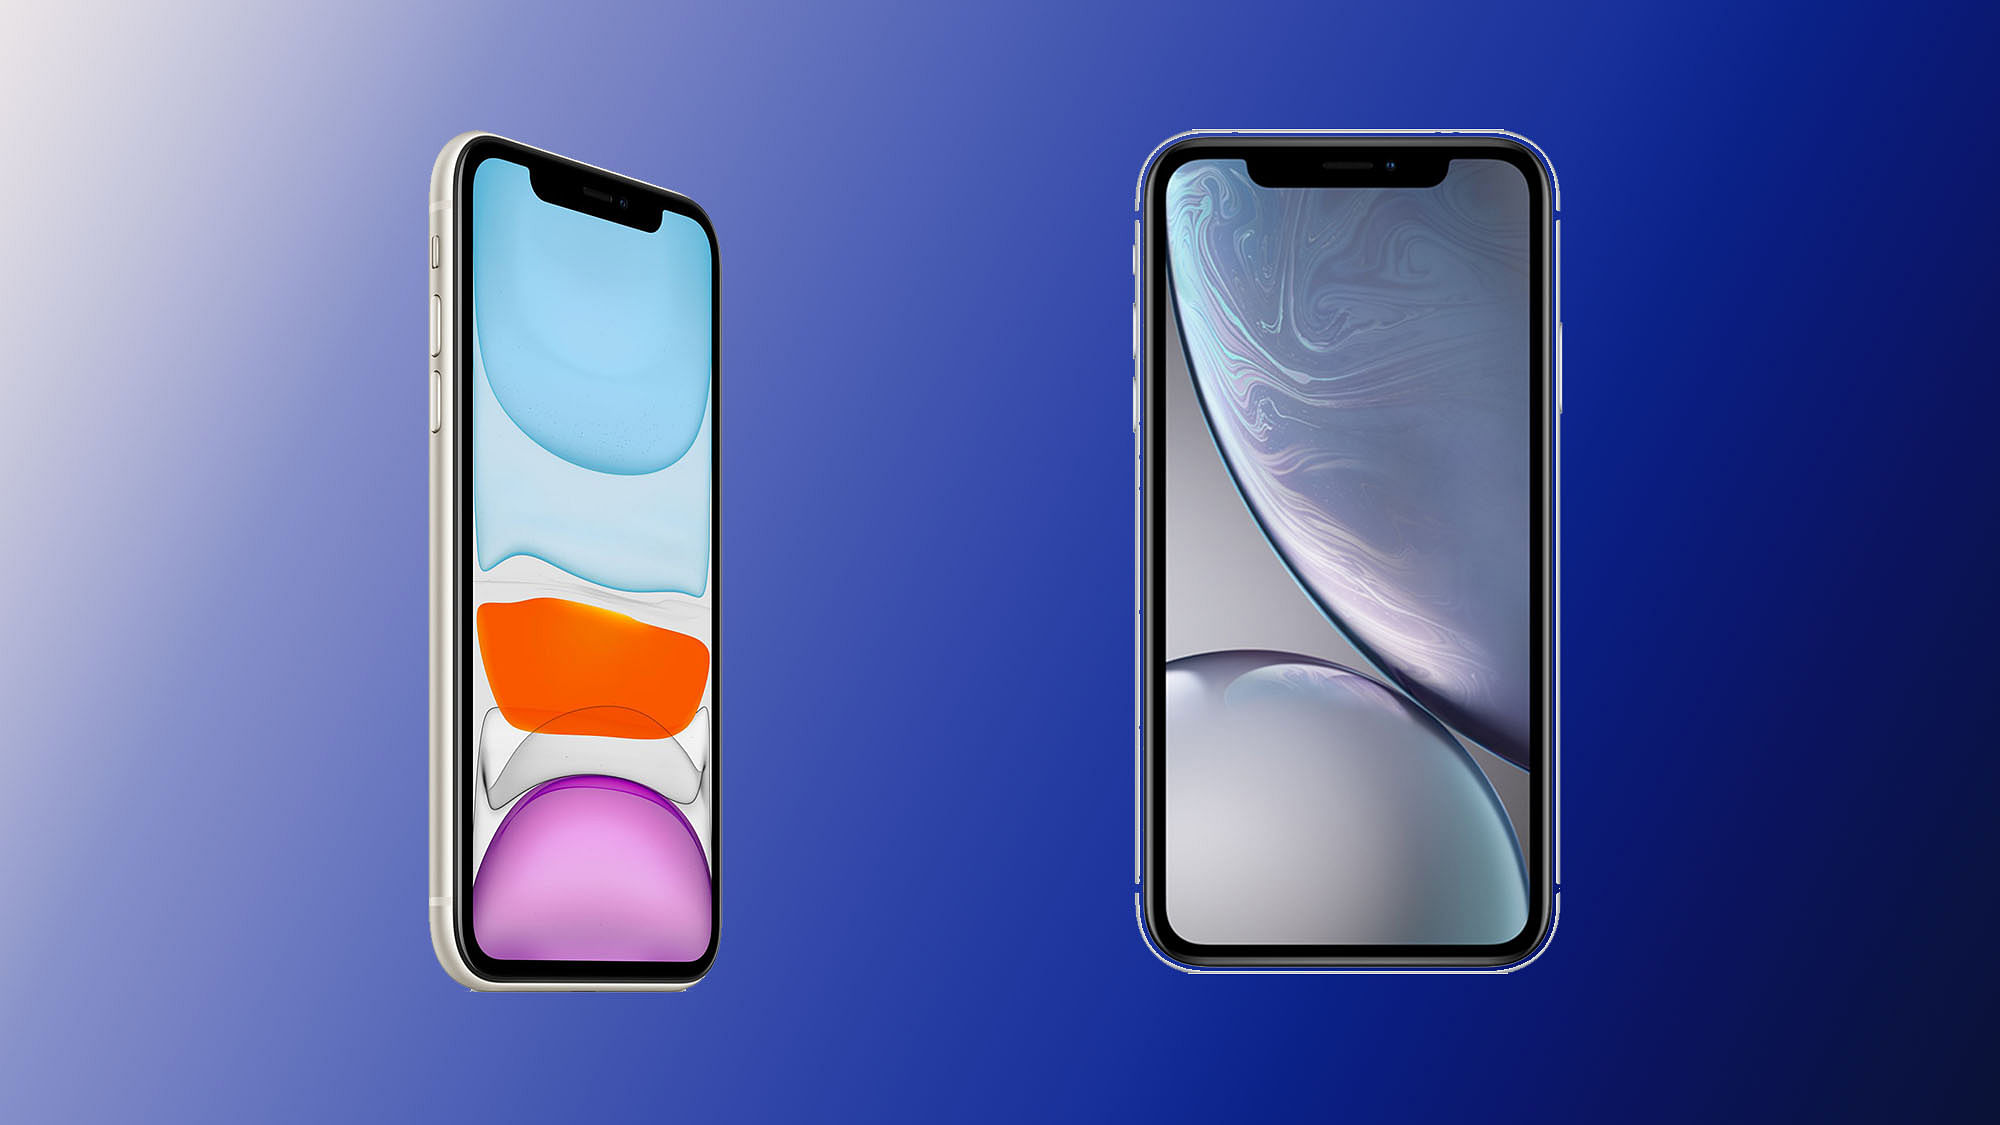 iPhone 11 (left) or the iPhone XR (right), which one is worth going for?